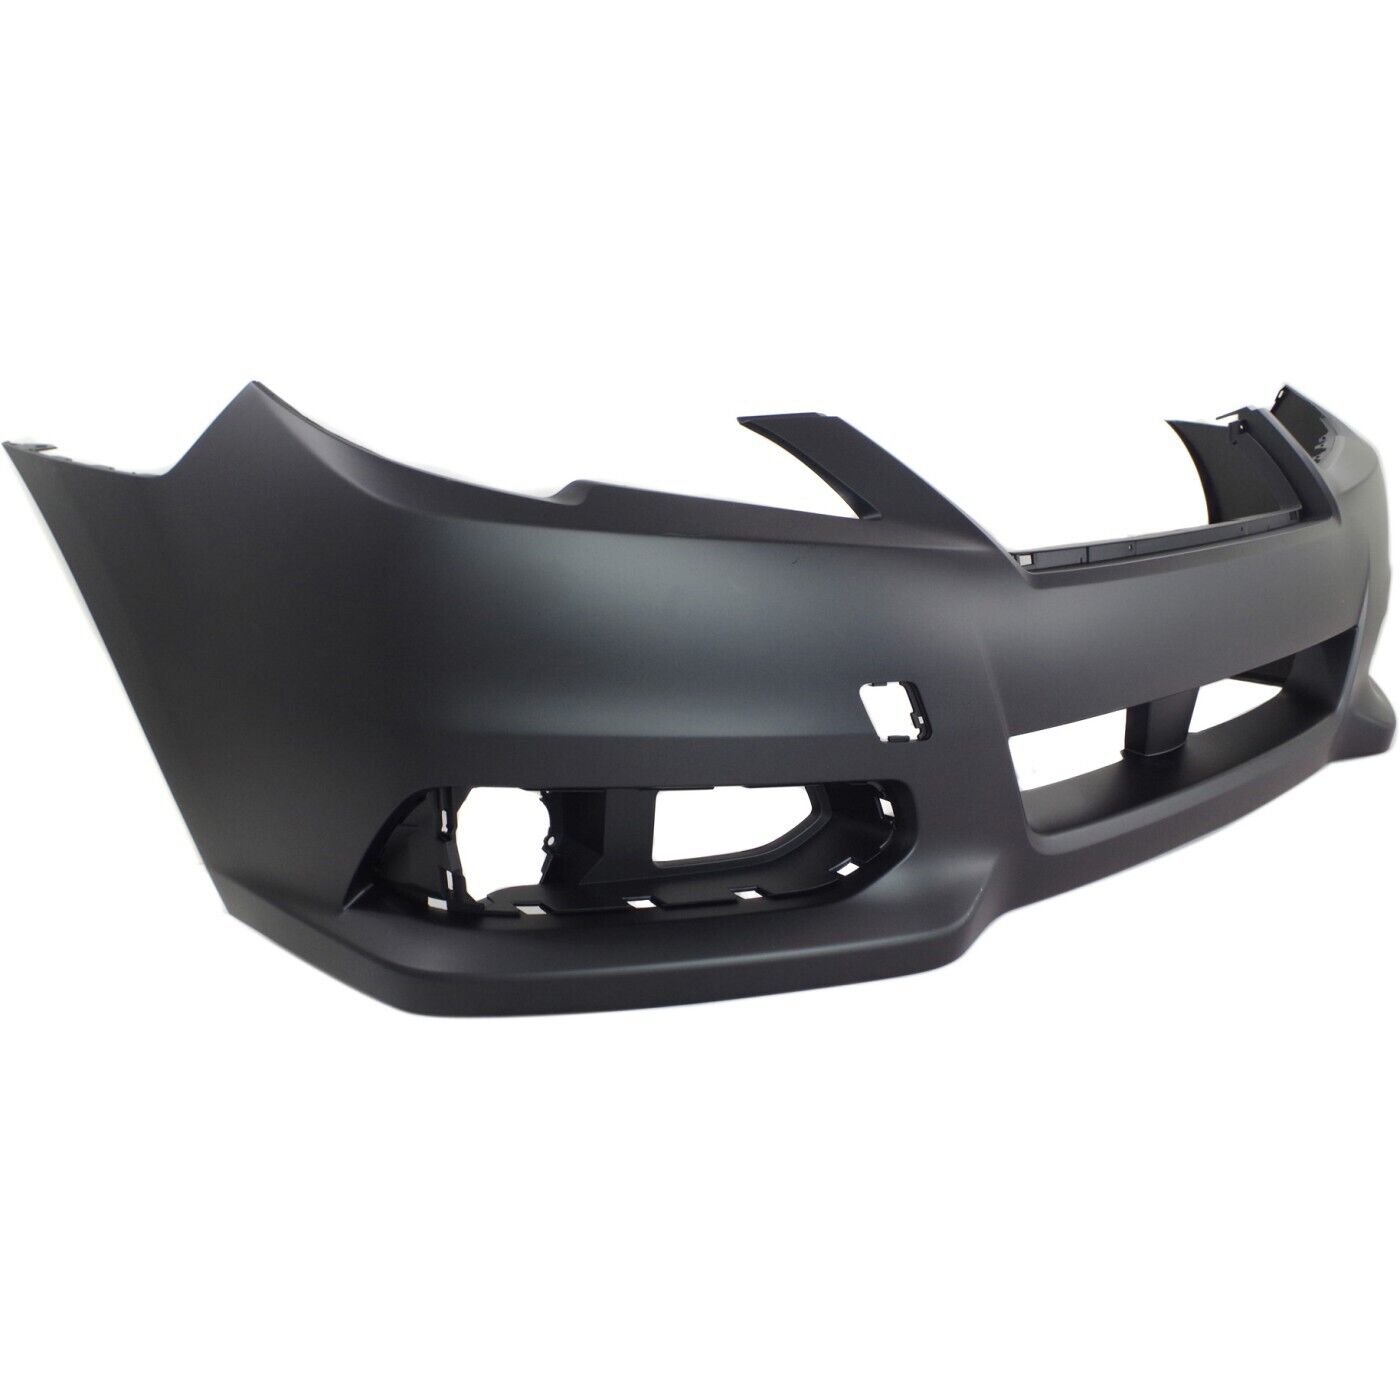 2013-2014 Subaru Legacy Front Bumper Painted to Match